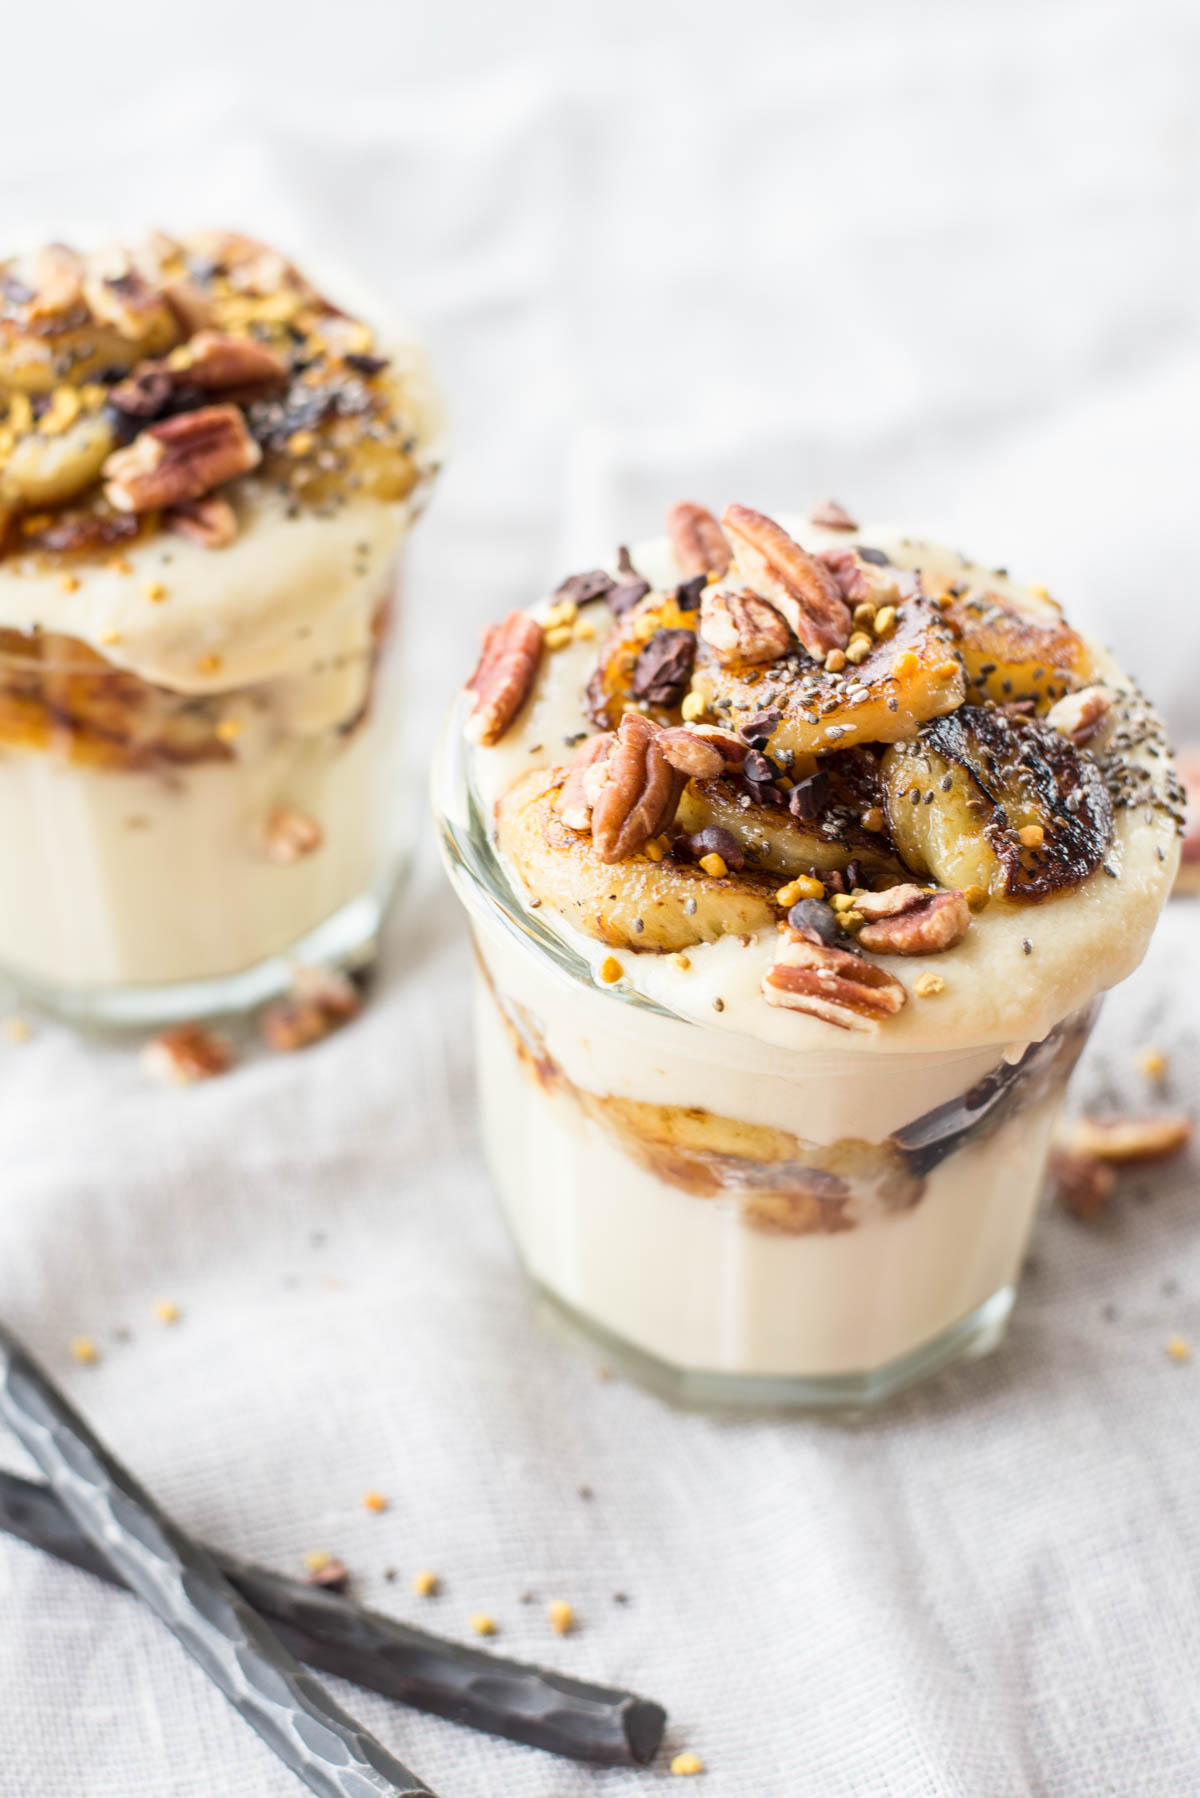 Trying to cut back on sugar? This superfoods pudding made with coconut milk will satisfy every craving.